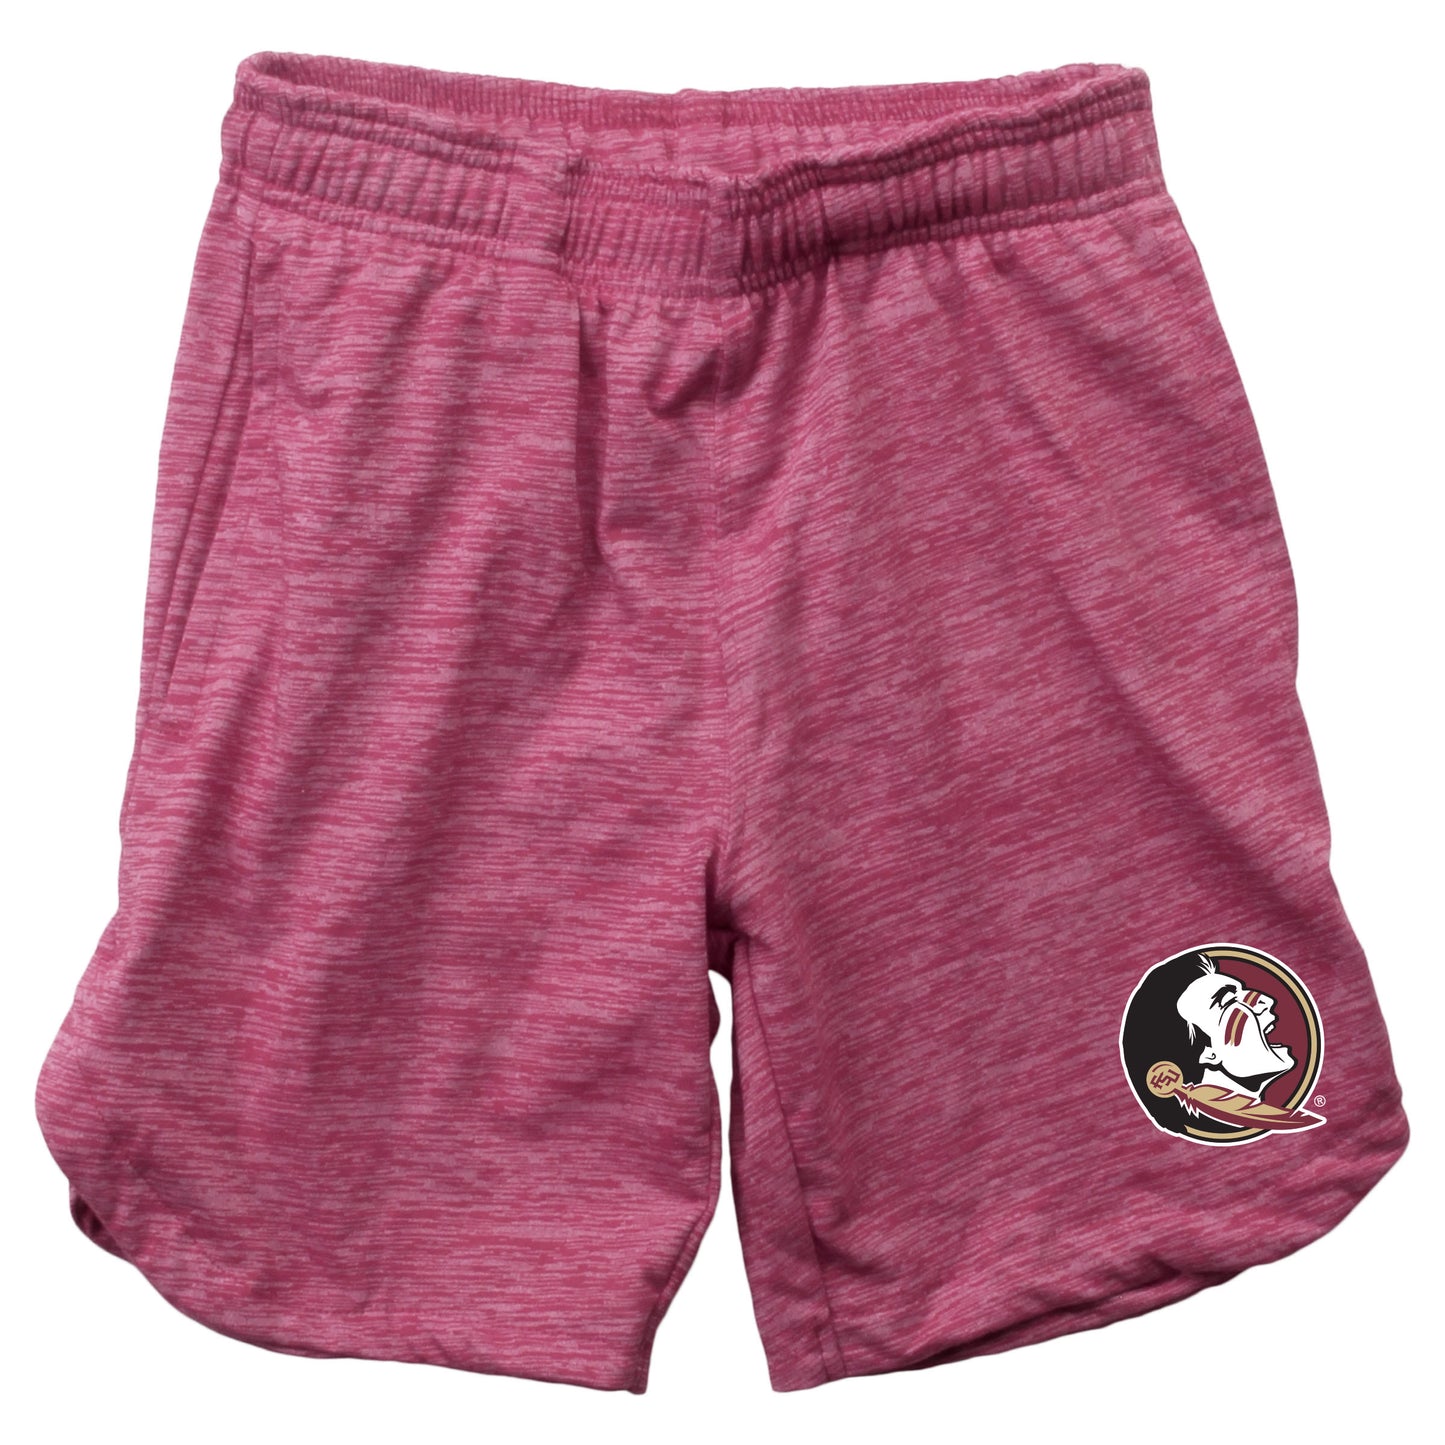 Florida State Seminoles Youth Boys Wes and Willy Cloudy Yarn Shorts